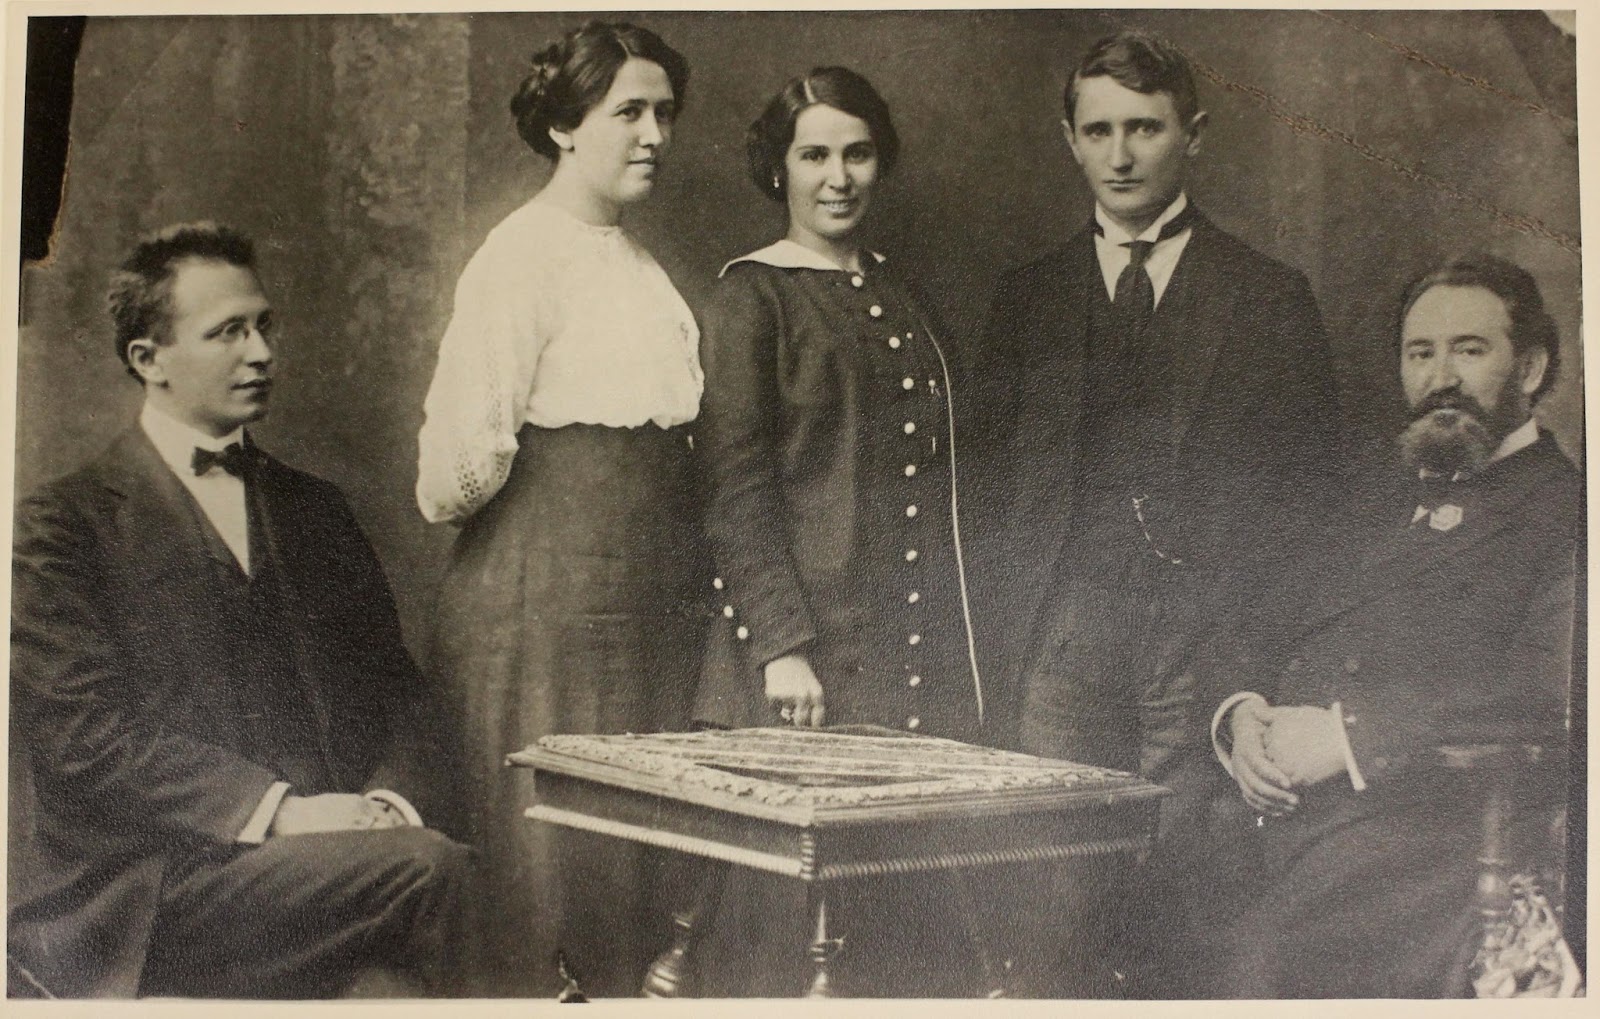 Black and white photograph of Nahum Goldmann with two women and two men.